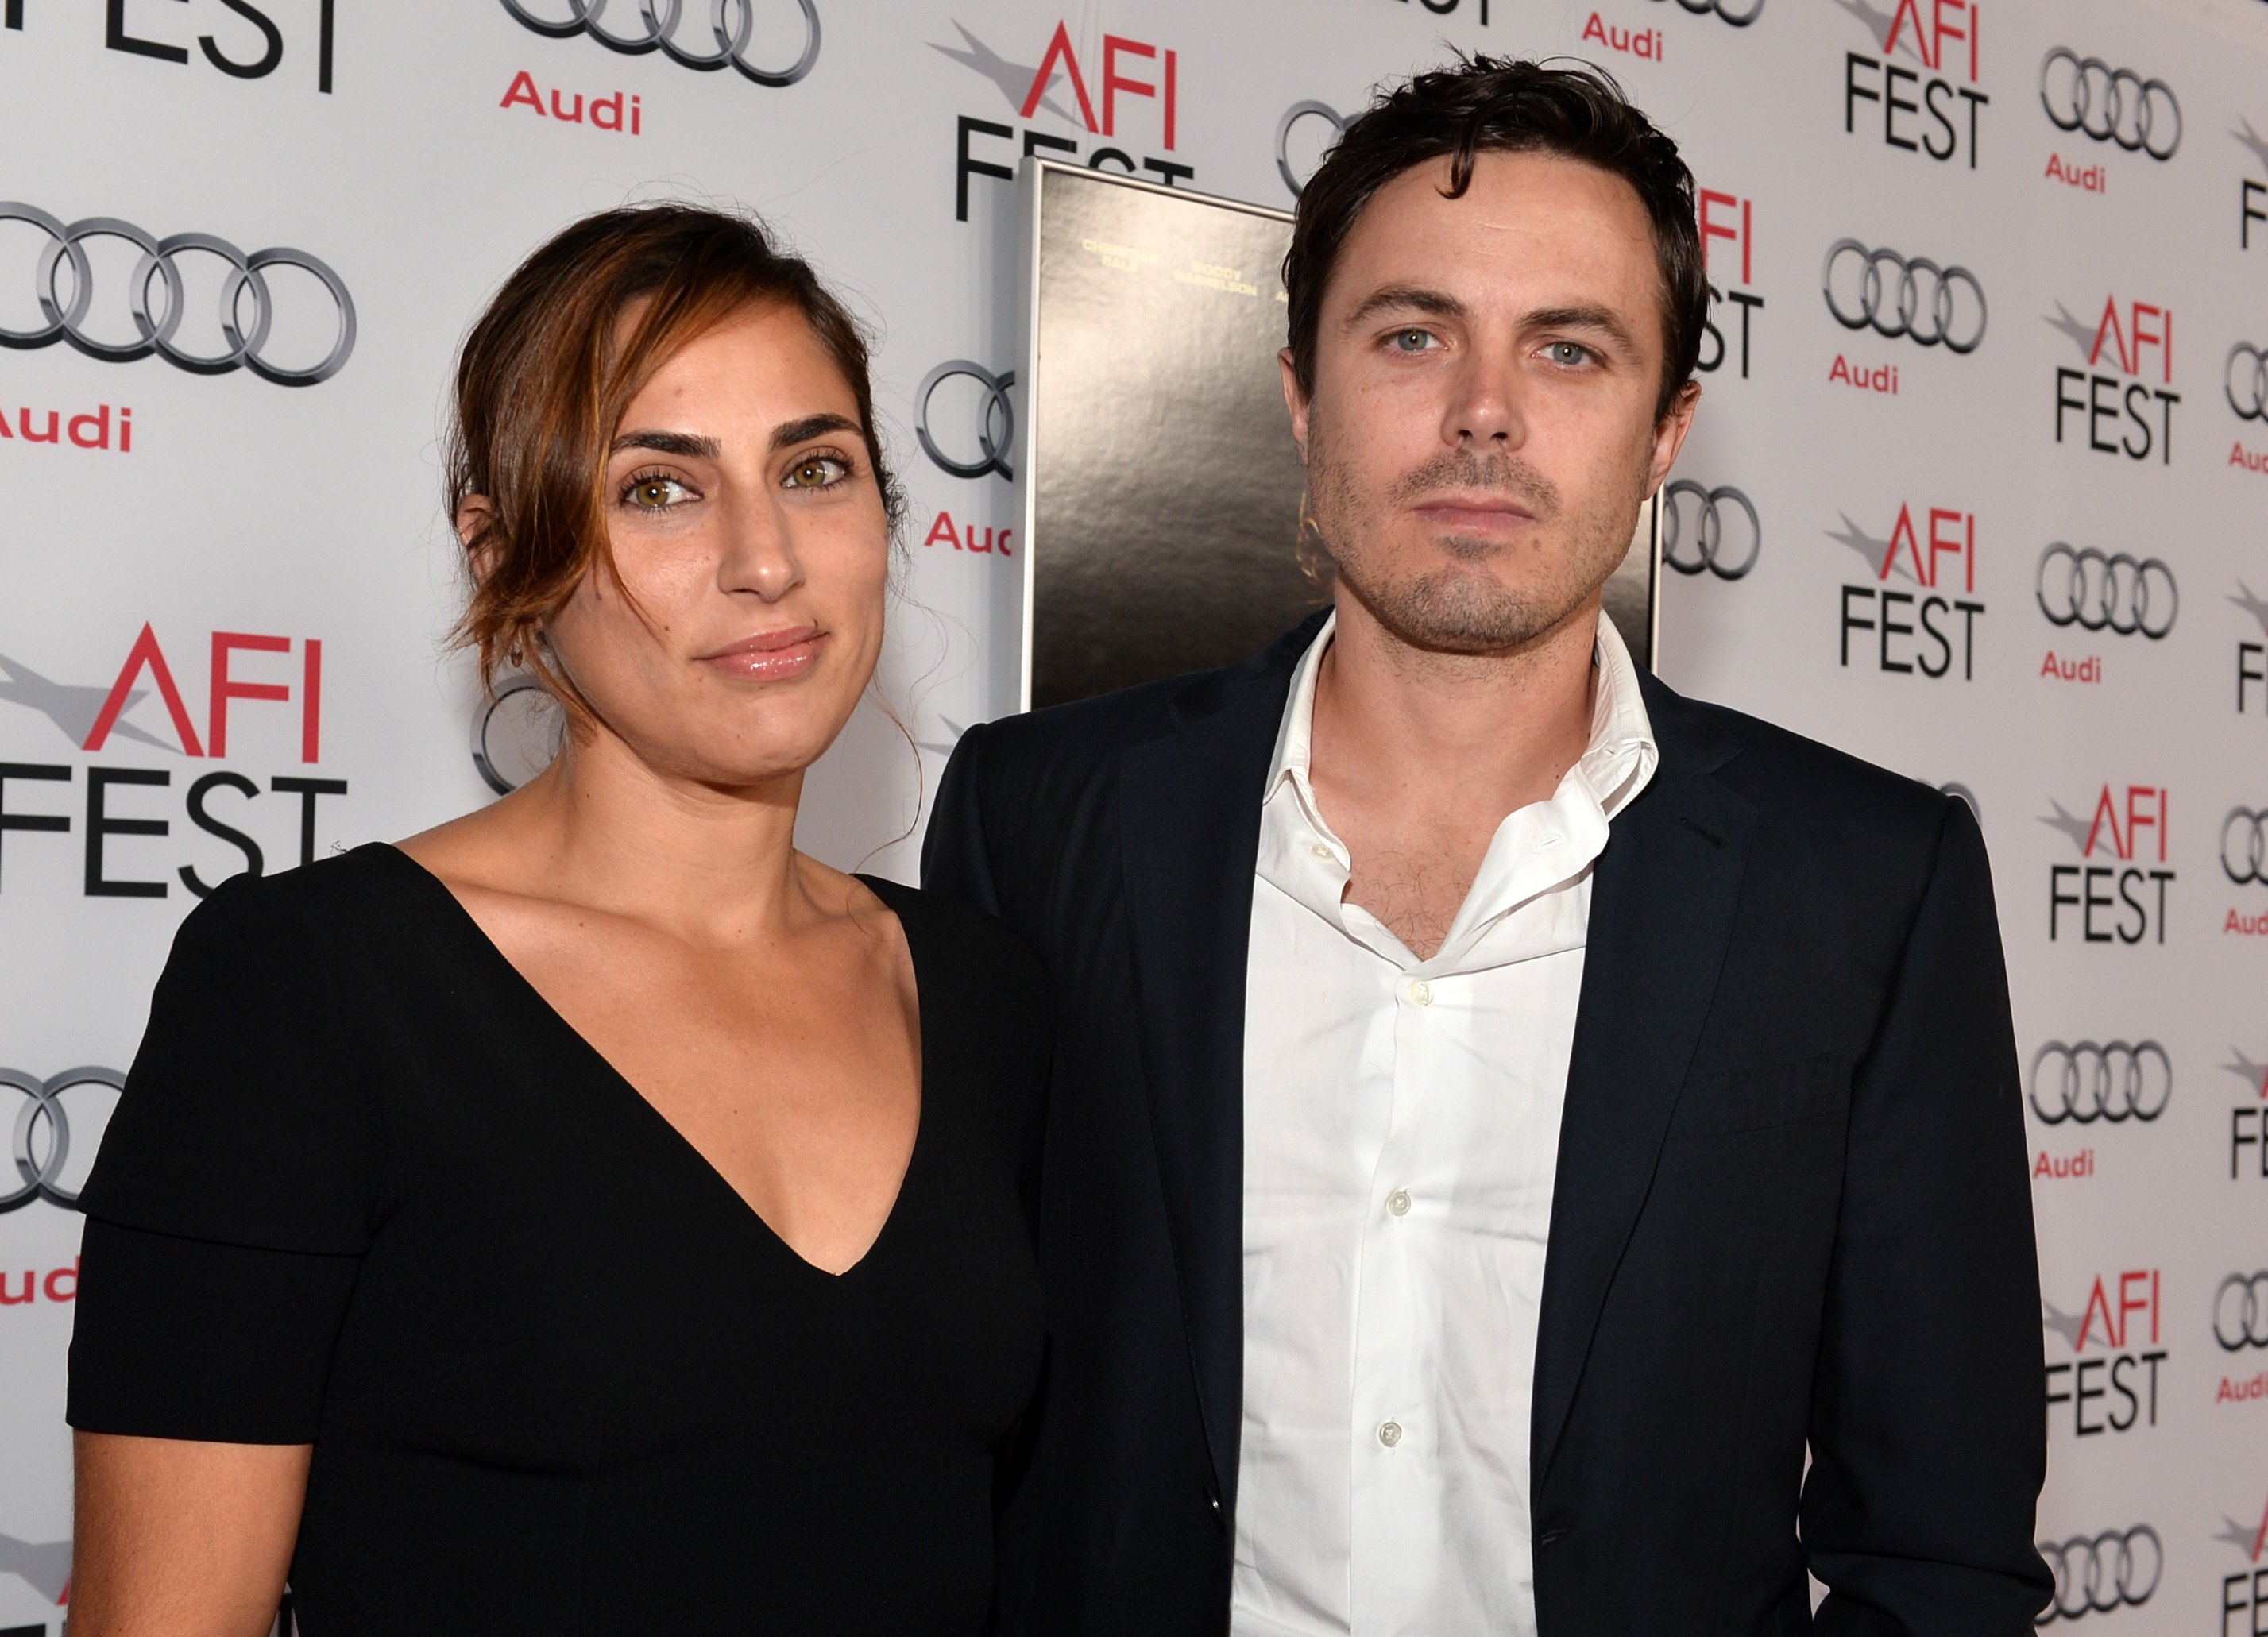 Summer Phoenix and Casey Affleck attend the screening of "Out of the Furnace" during AFI FEST 2013 presented by Audi at TCL Chinese Theatre on November 9, 2013 in Hollywood, California. | Source: Getty Images